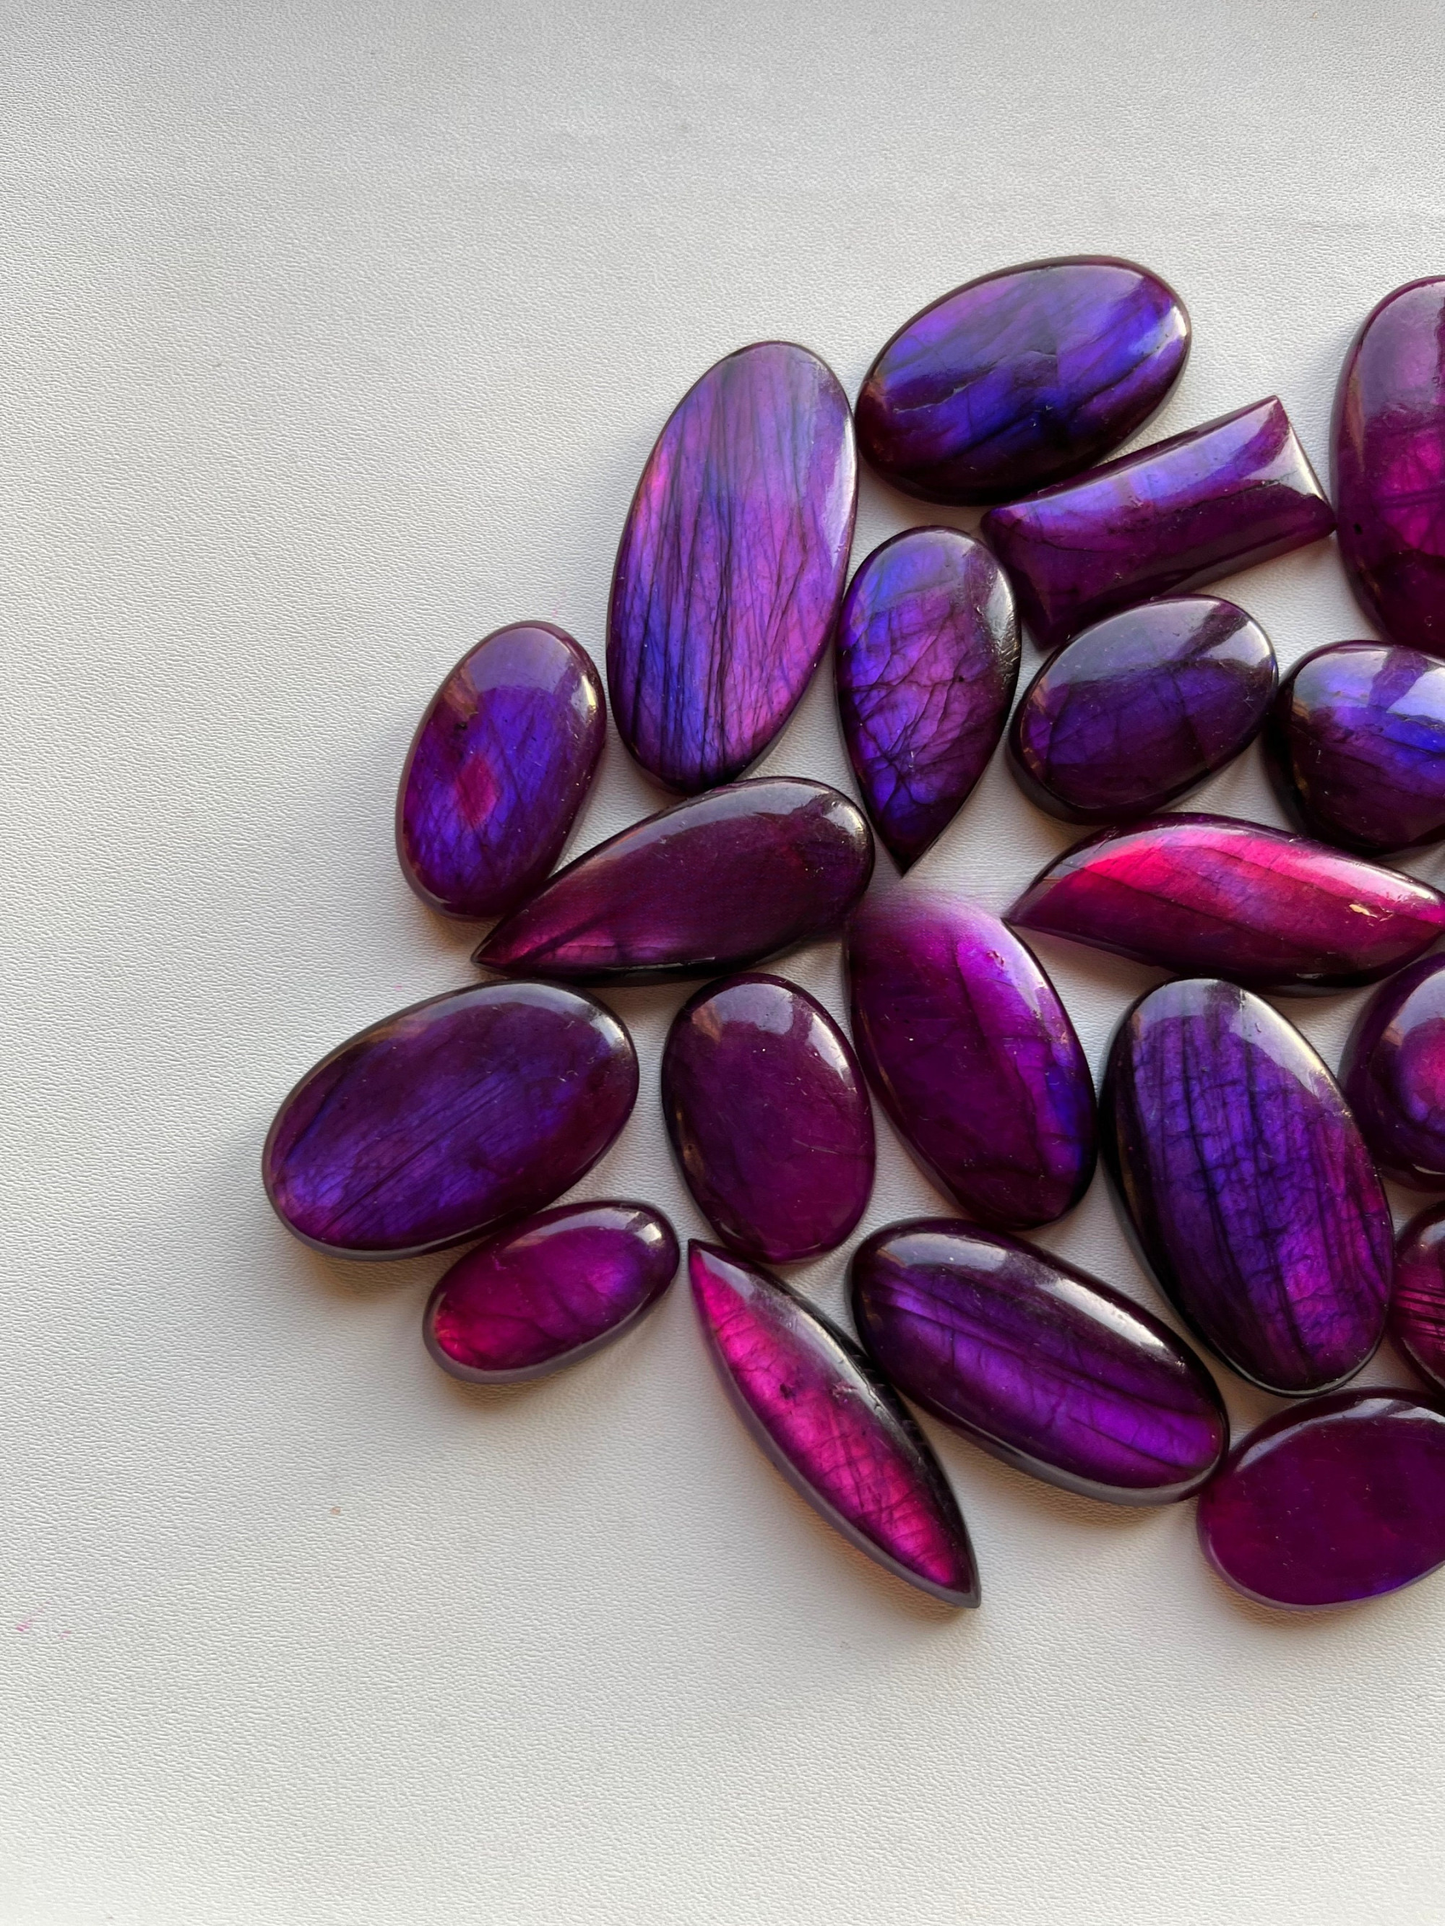 DYED Purple Labradorite Cabochon Wholesale Lot By Weight Used For Jewelry Making